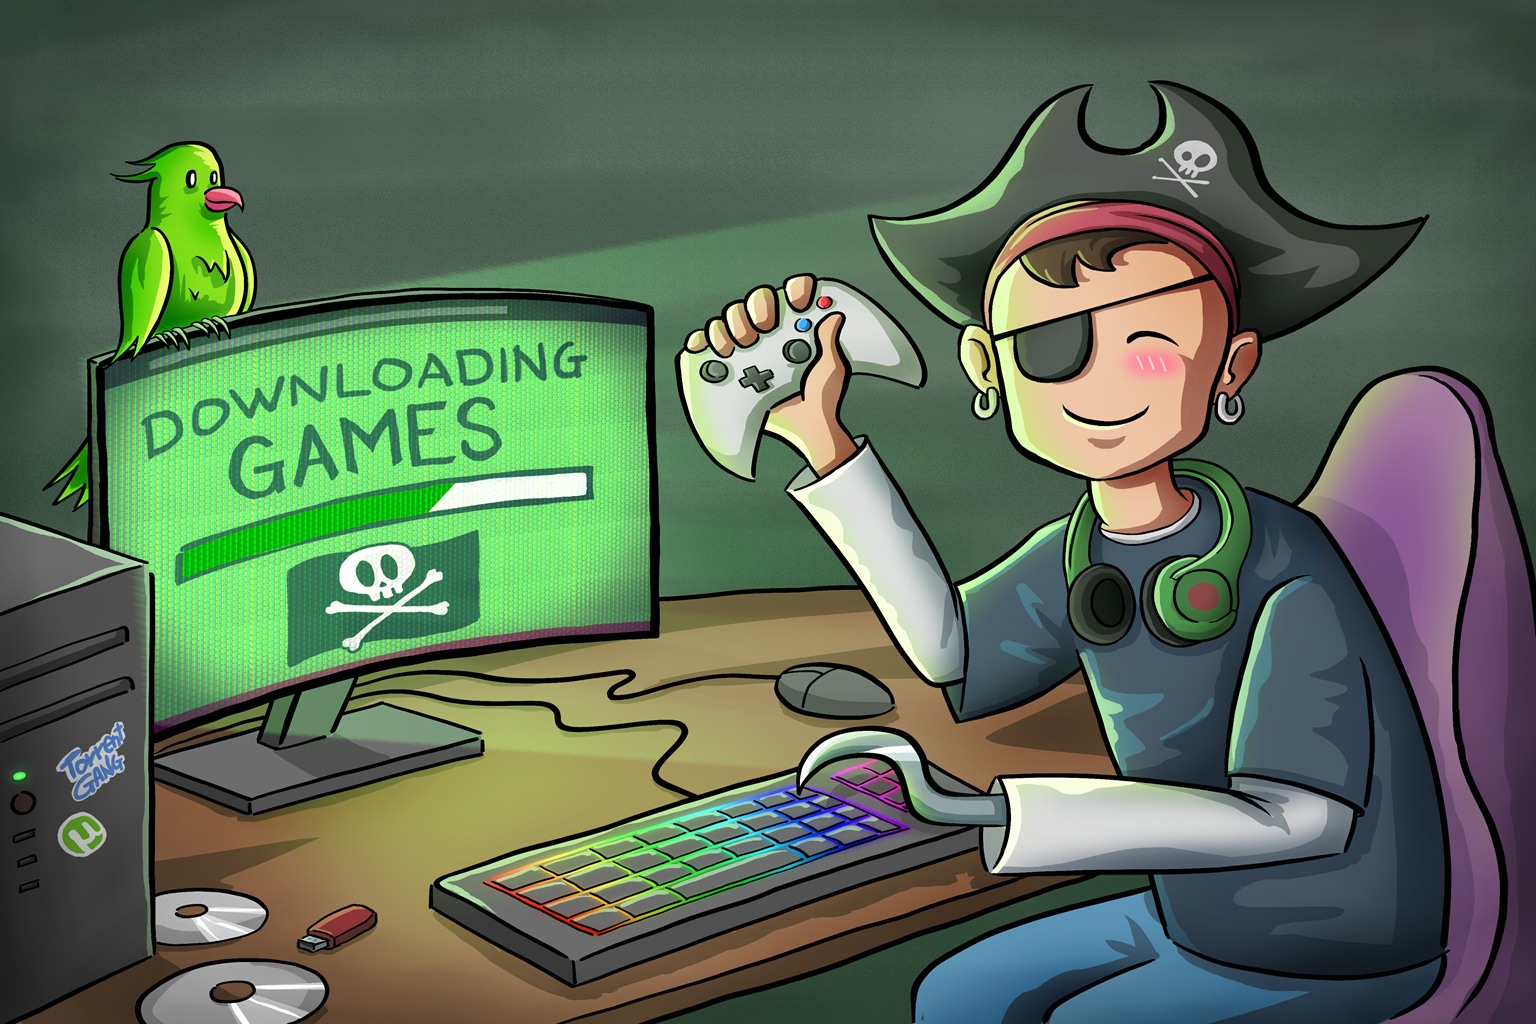 An illustration of a pirate illegally downloading video games over a computer.